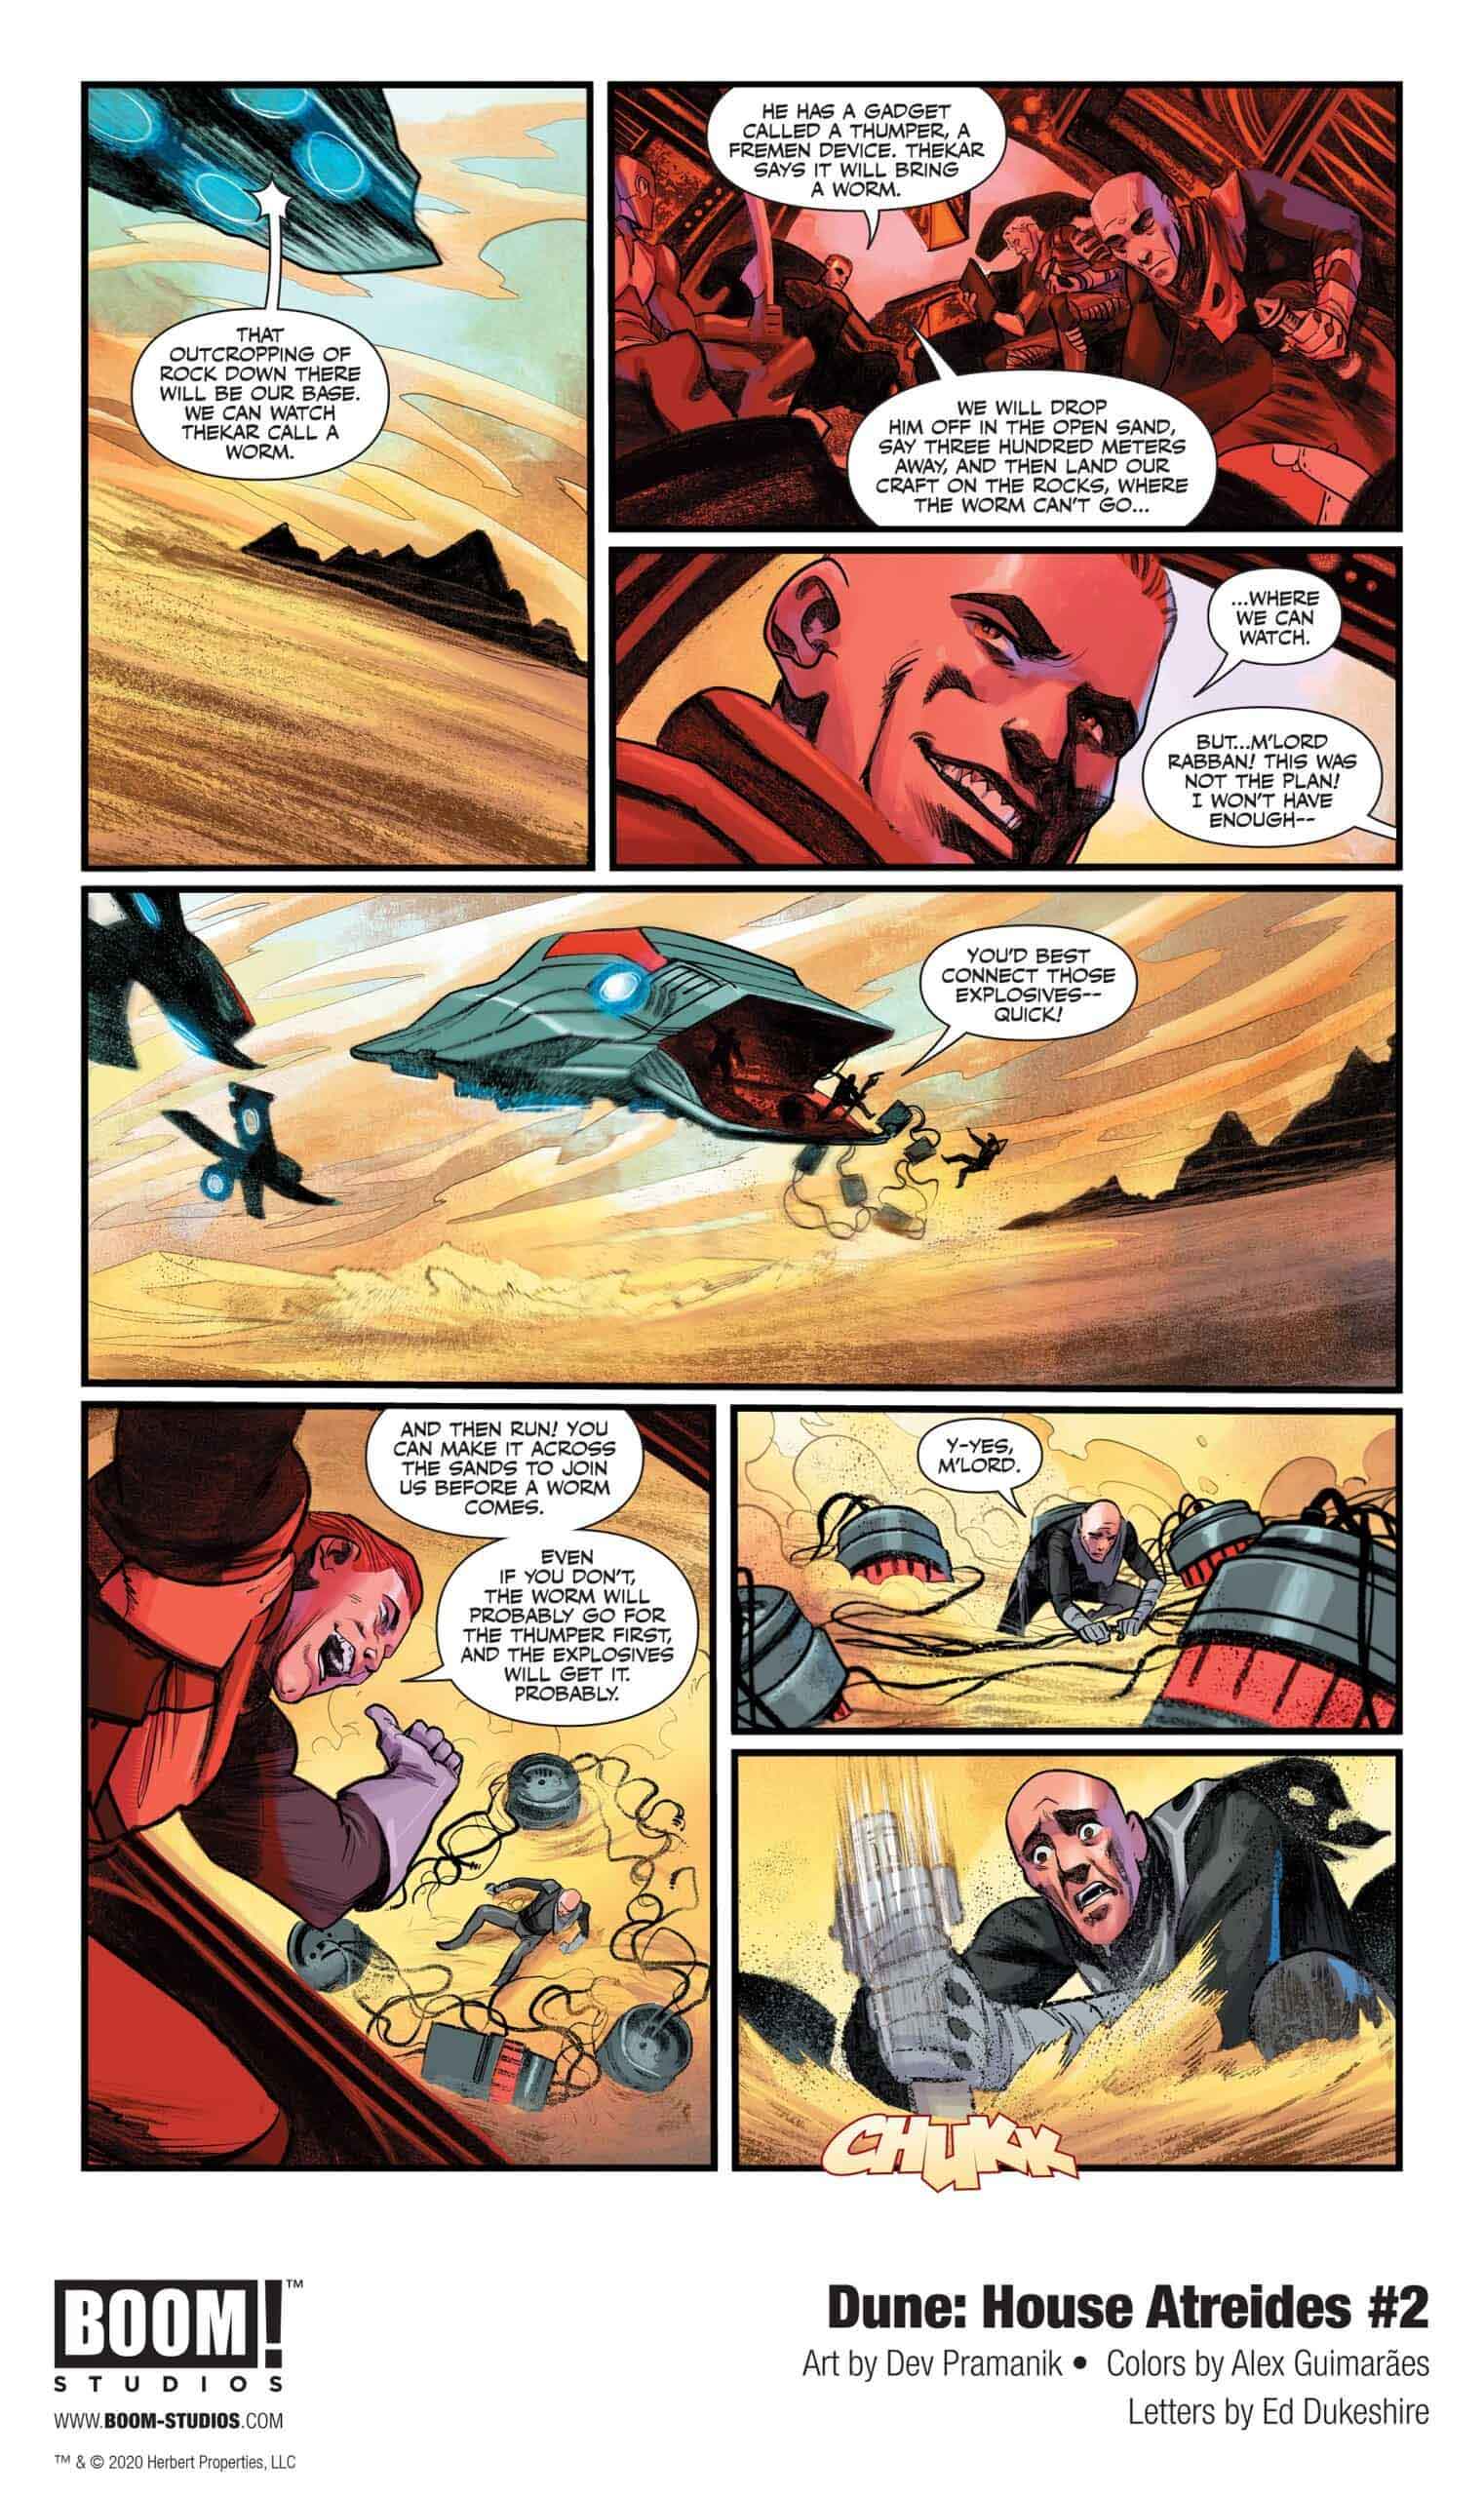 Dune: House Atreides comic series. Issue #2, preview page 4.